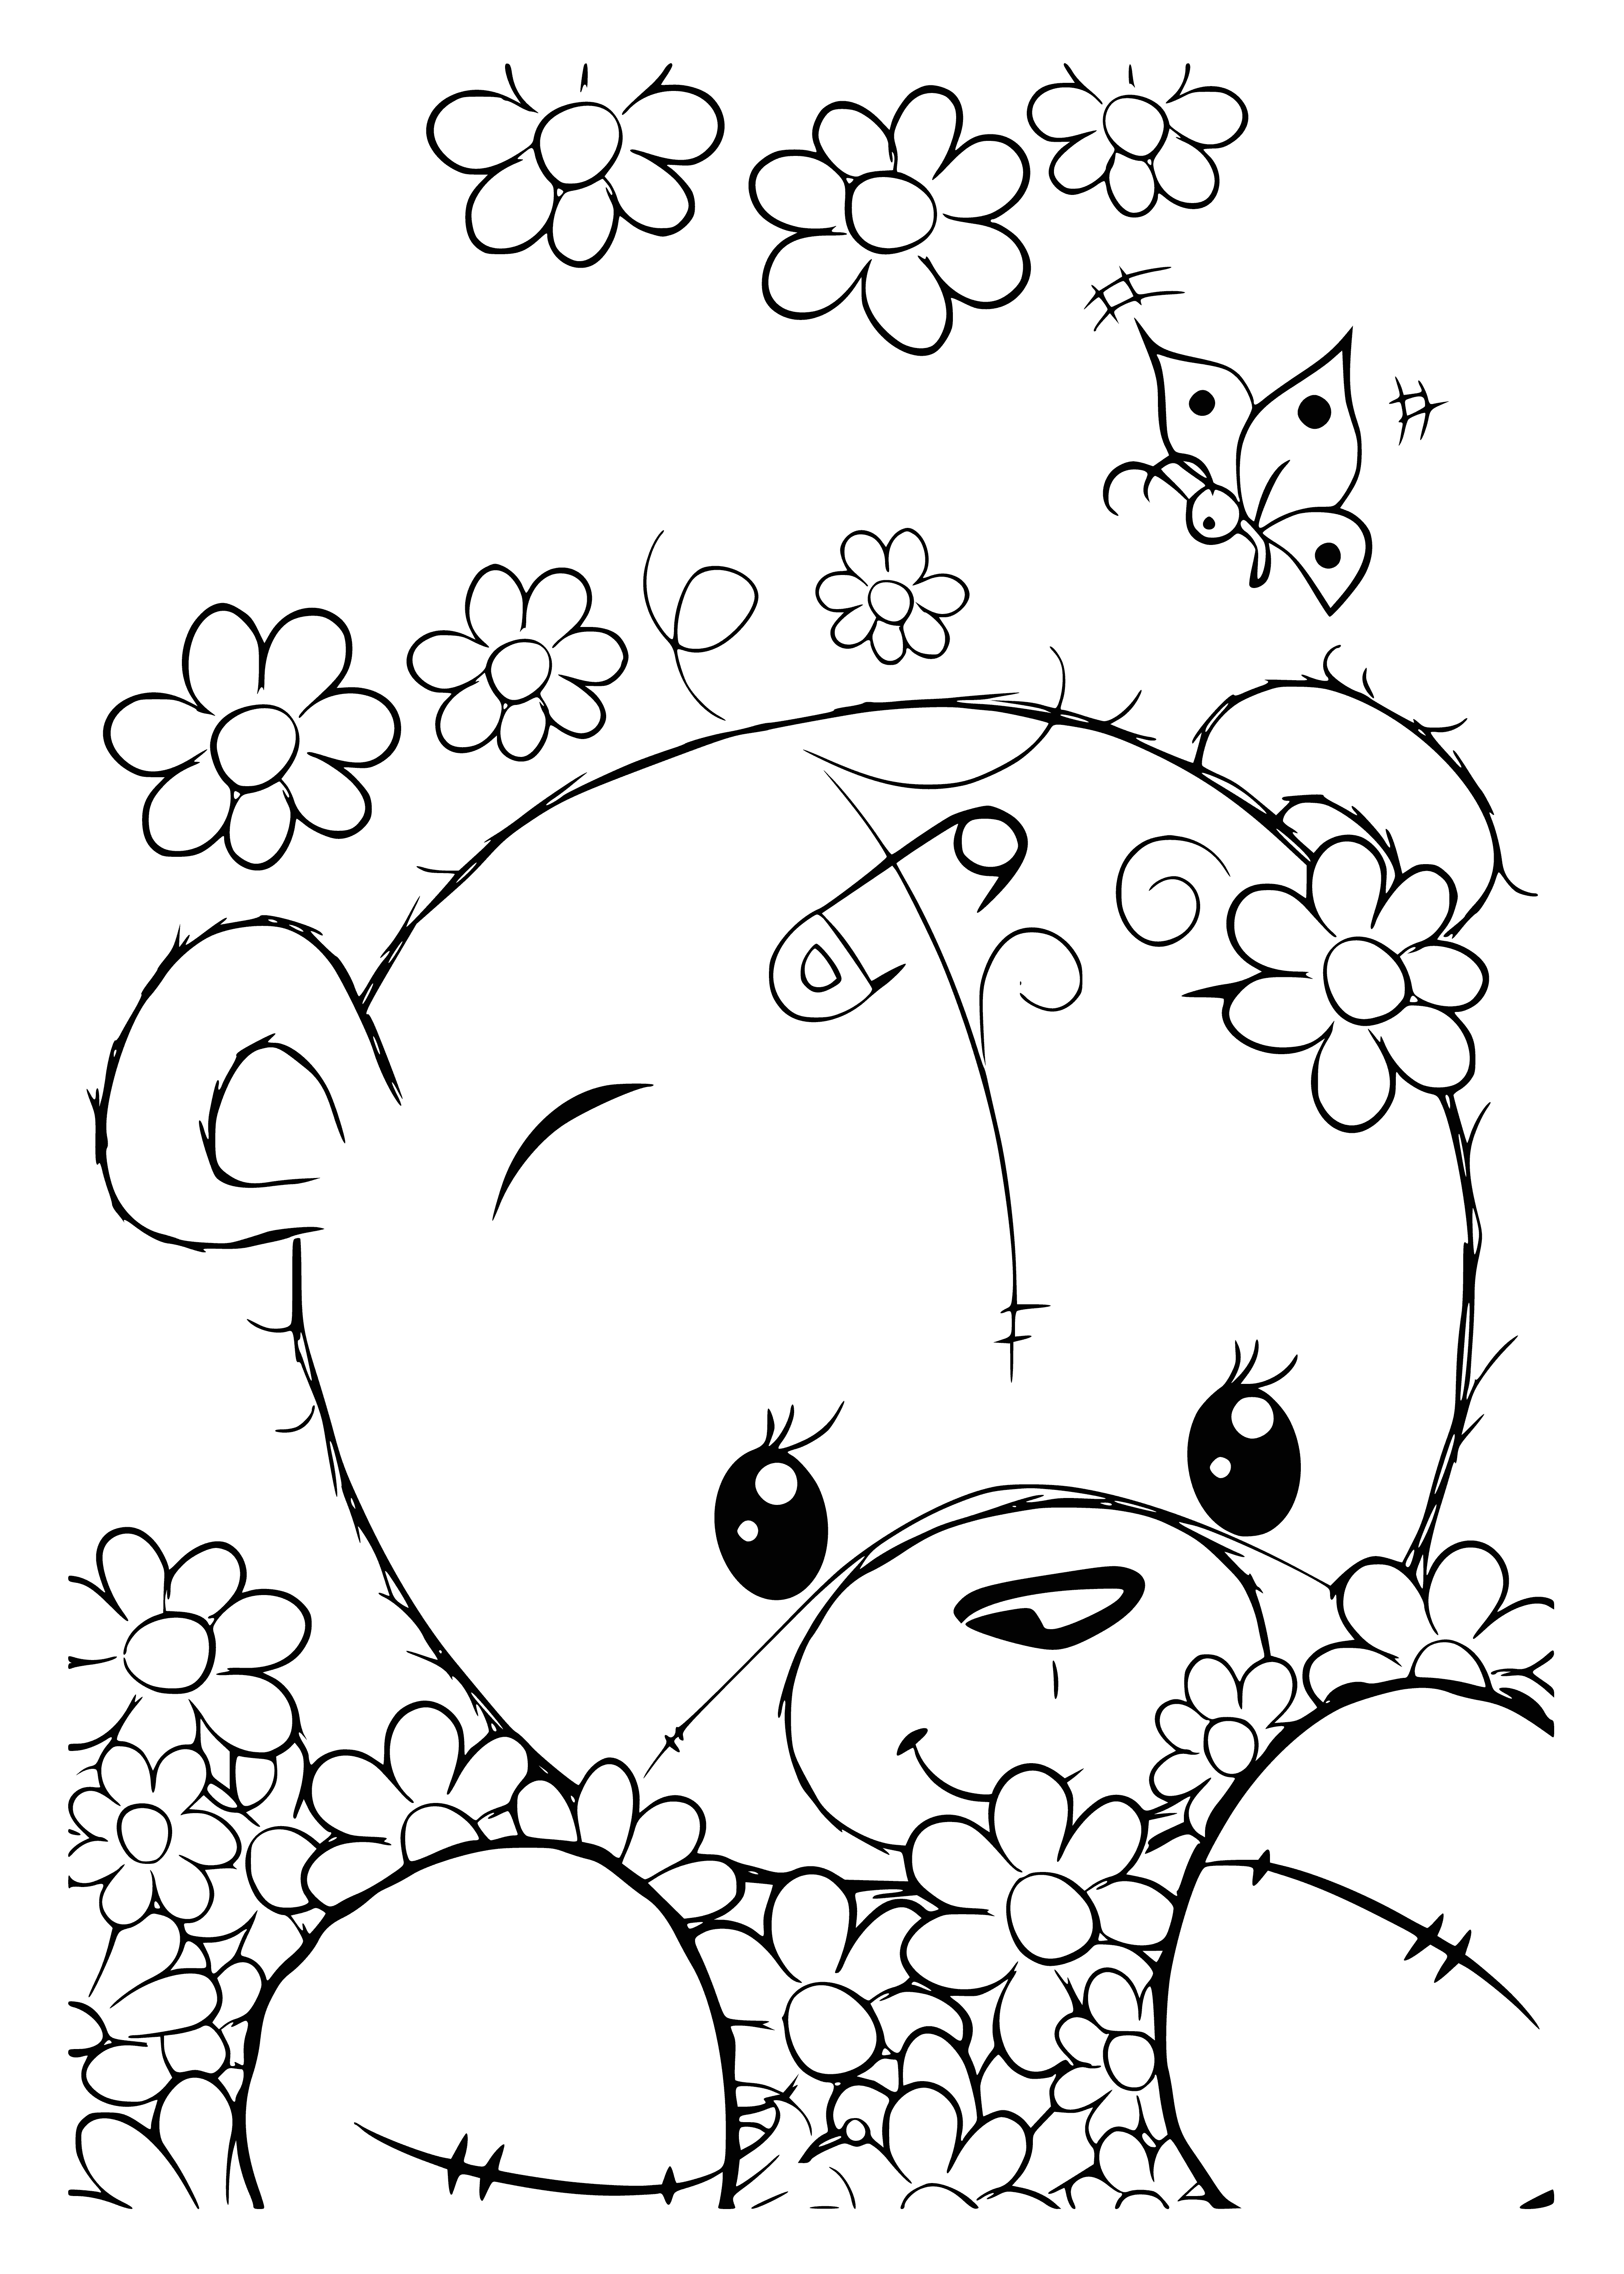 coloring page: Teddy bear holds daisies, surrounded by happy, rosy-cheeked, big-eyed small bears. They look content.